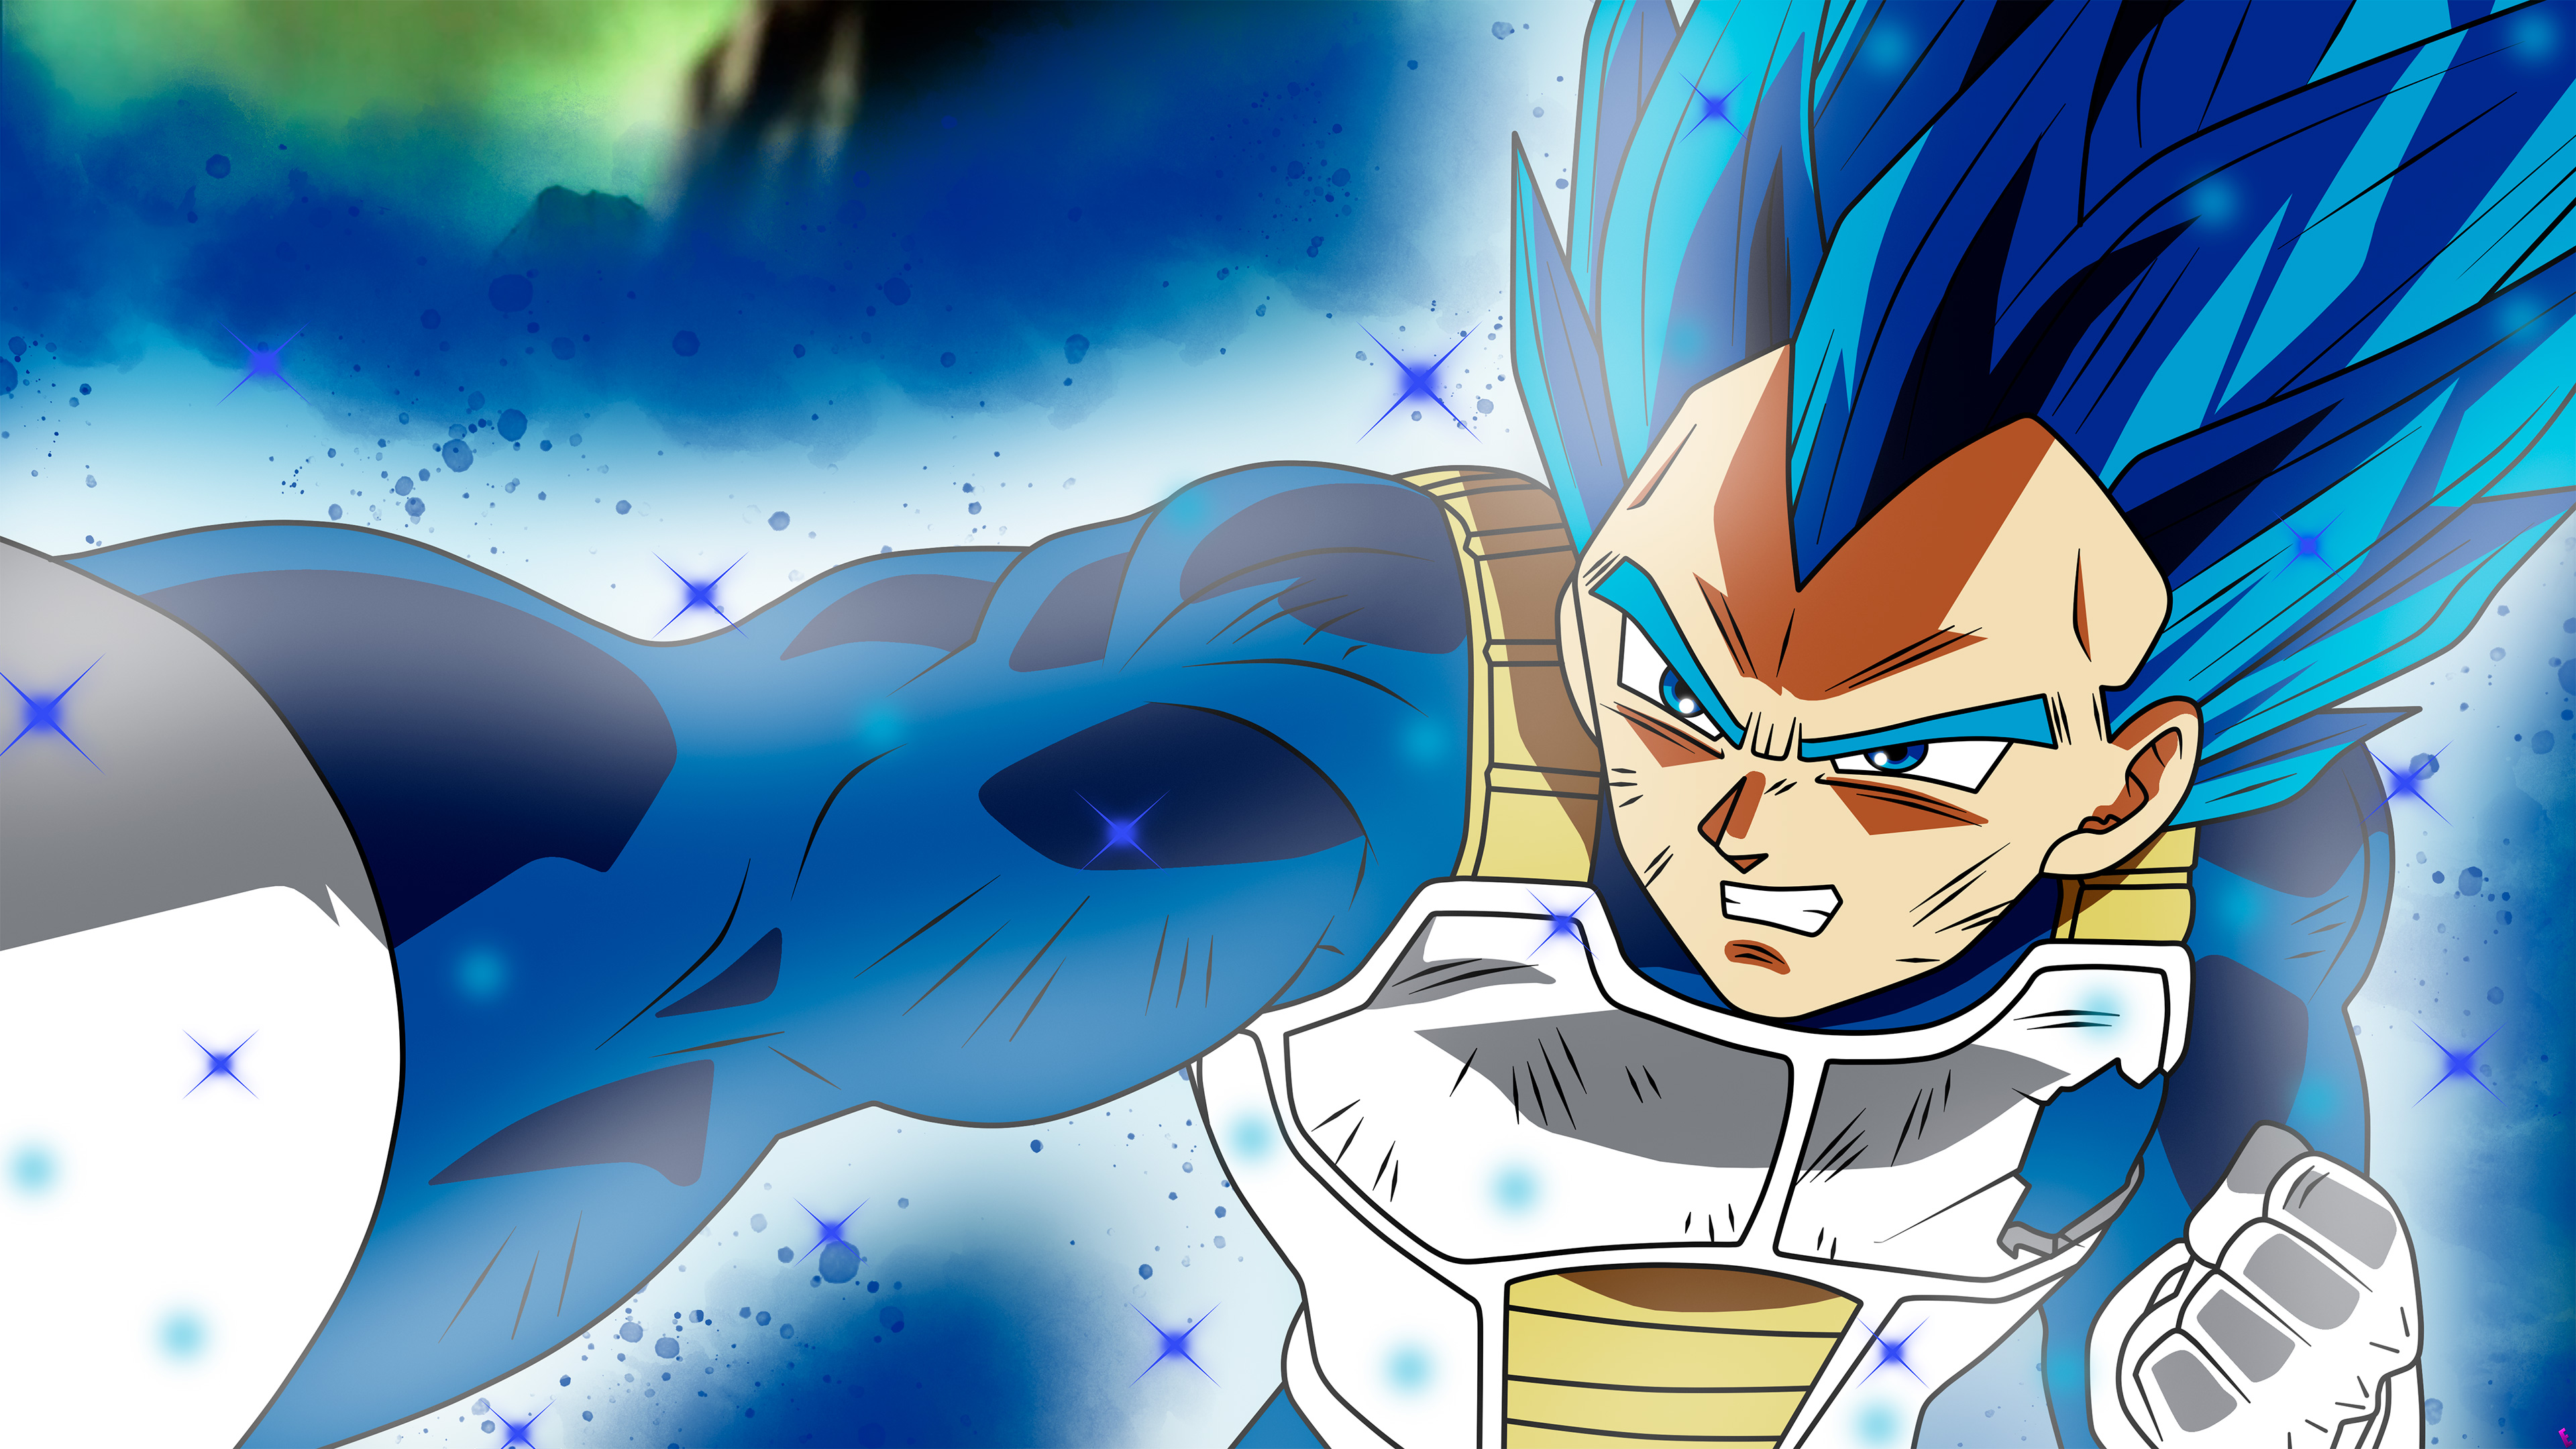 Anime Dragon Ball Super Vegeta SSJ Blue Full Power, HD Anime, 4k Wallpapers, Image, Backgrounds, Photos and Pictures